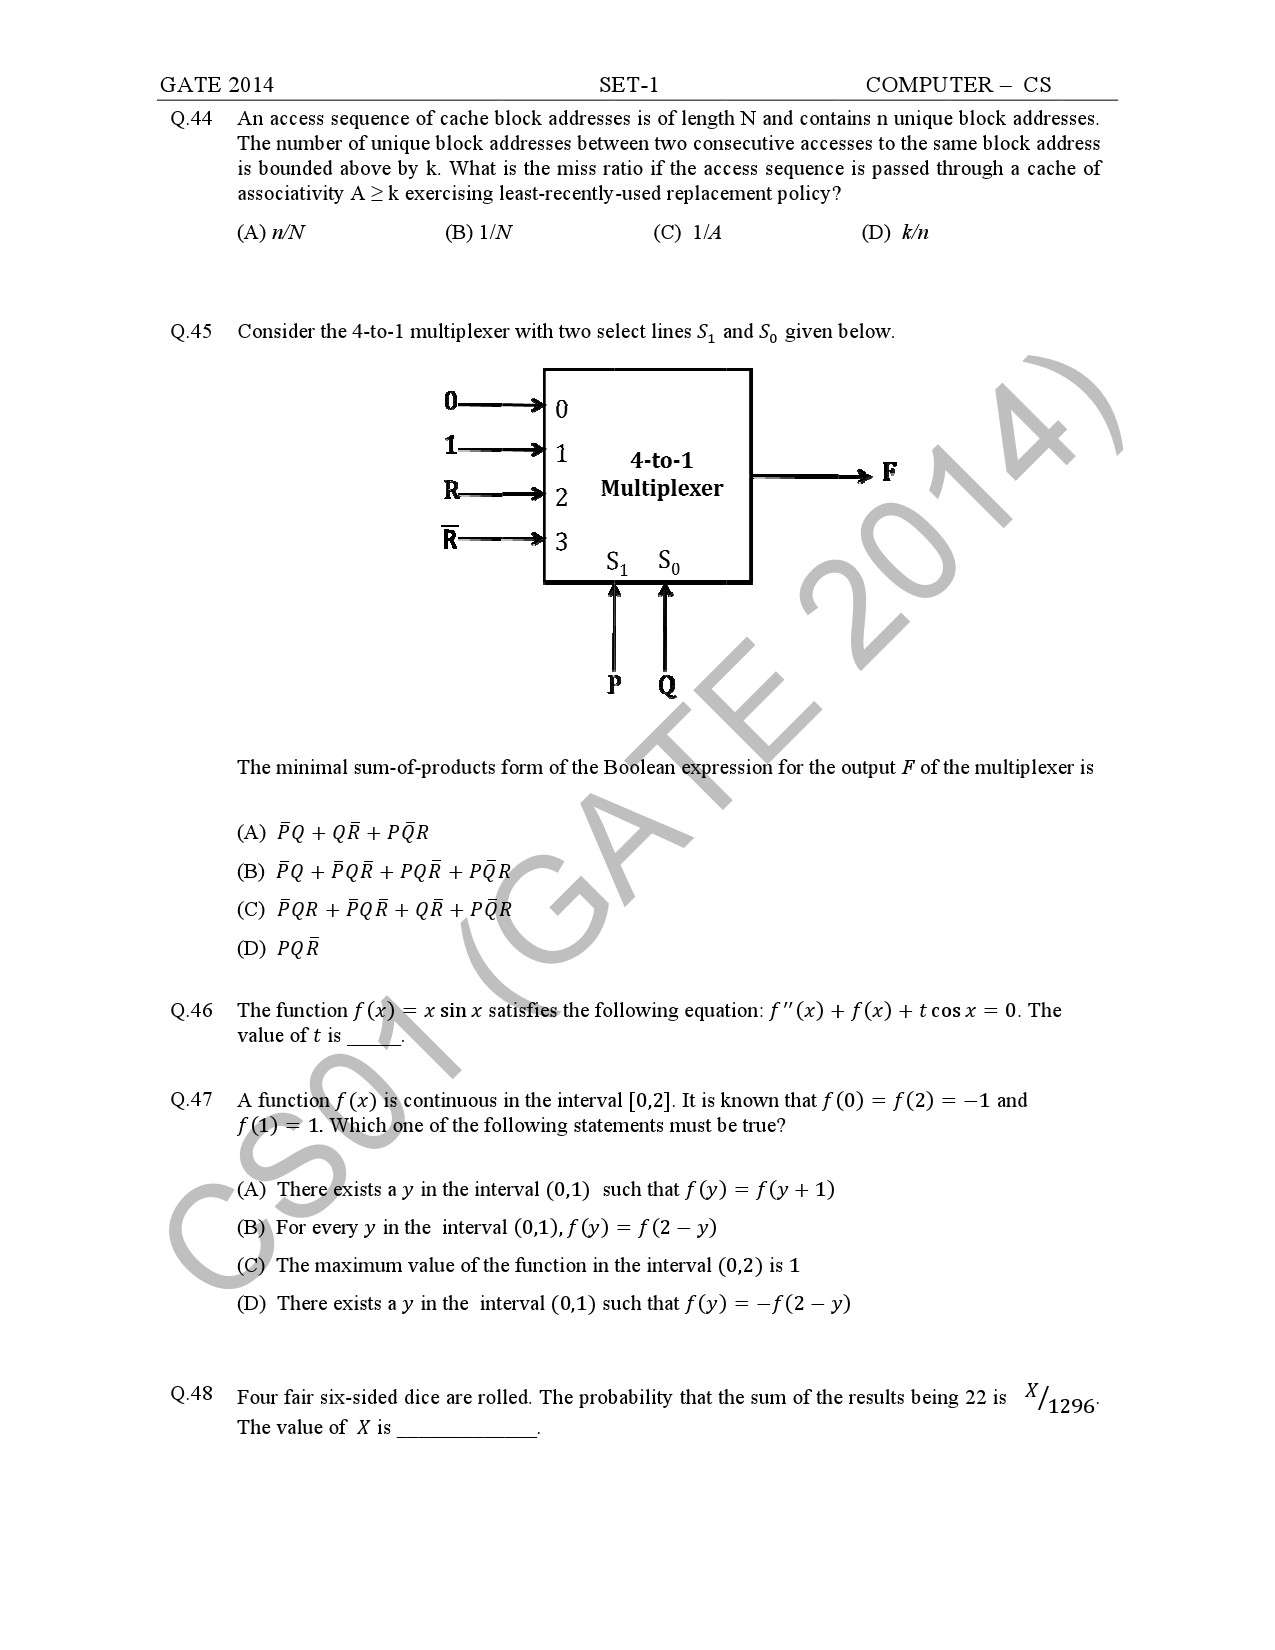 GATE Exam Question Paper 2014 Computer Science and Information Technology Set 1 18